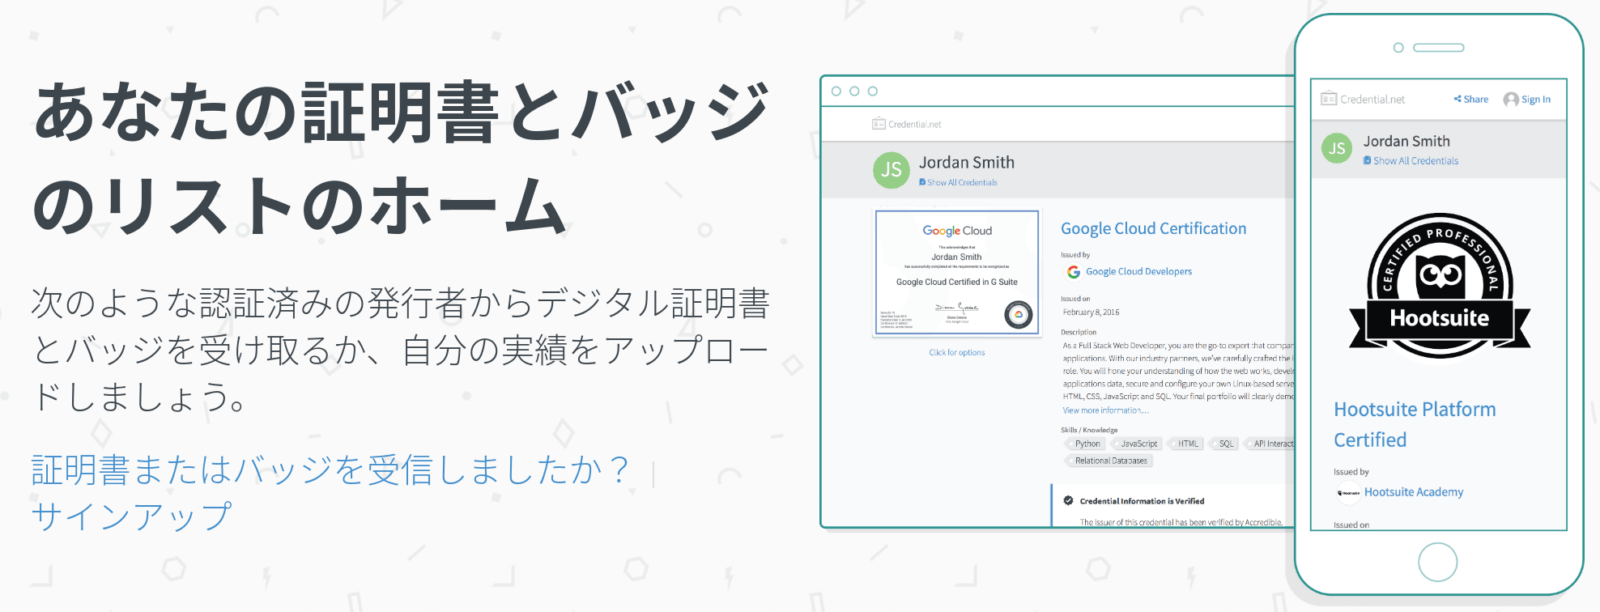 credential.net: ホーム